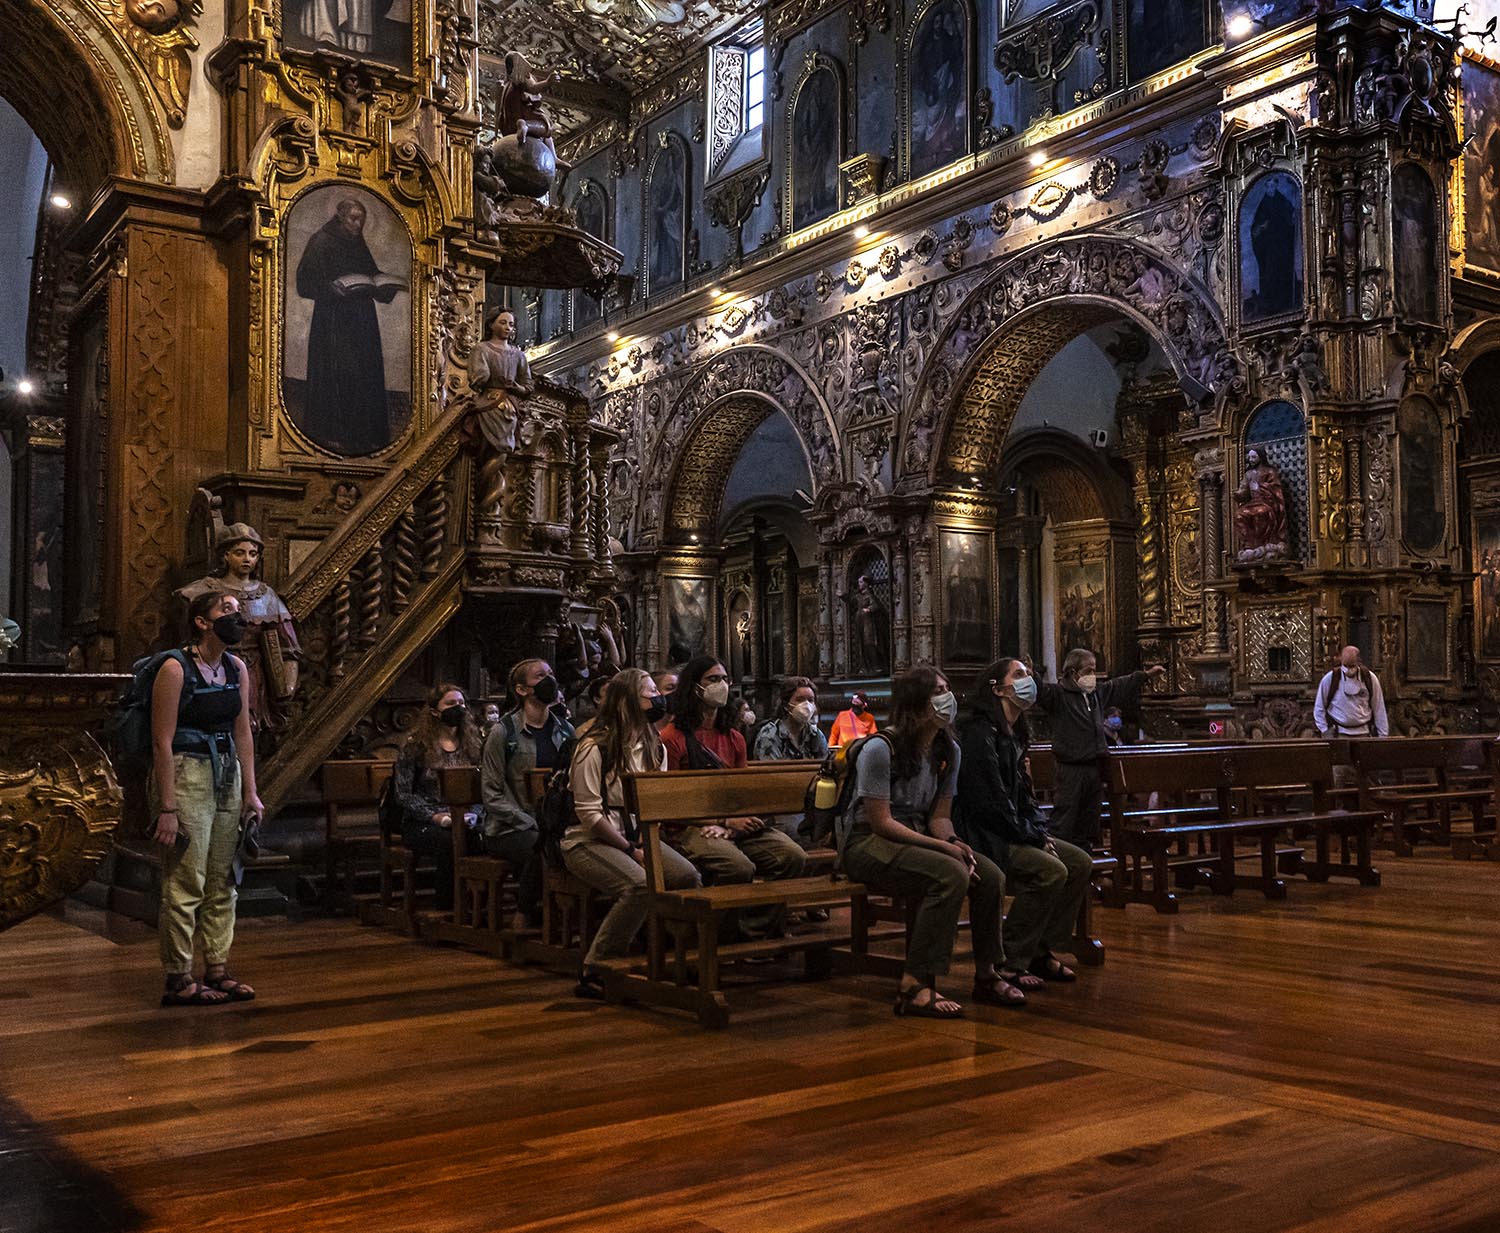 Students seated in pews, looking up at the ornate decorations inside of a church